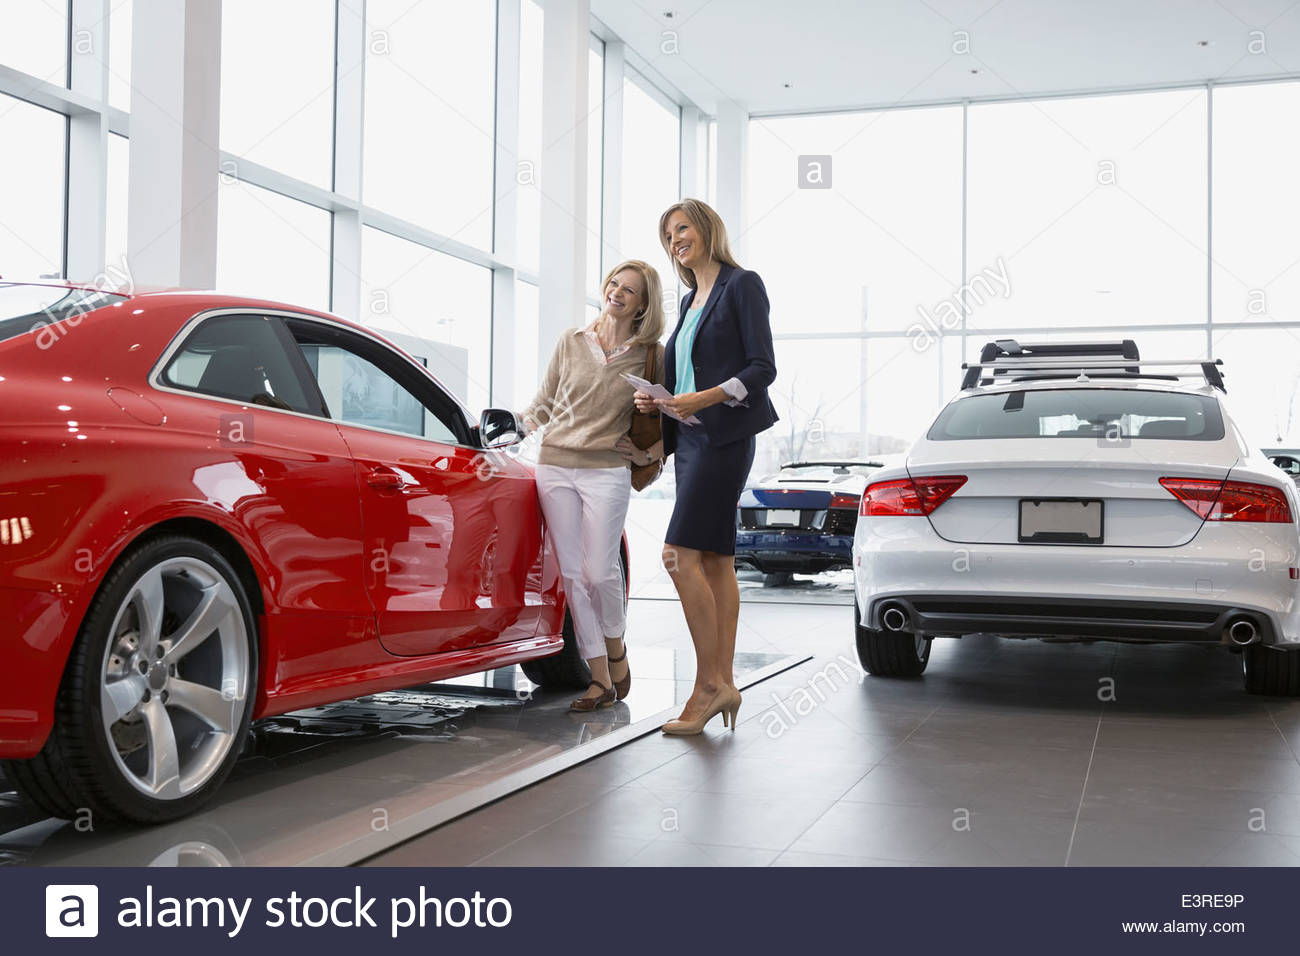 Saleswoman and woman looking at car in showroom Stock Photo